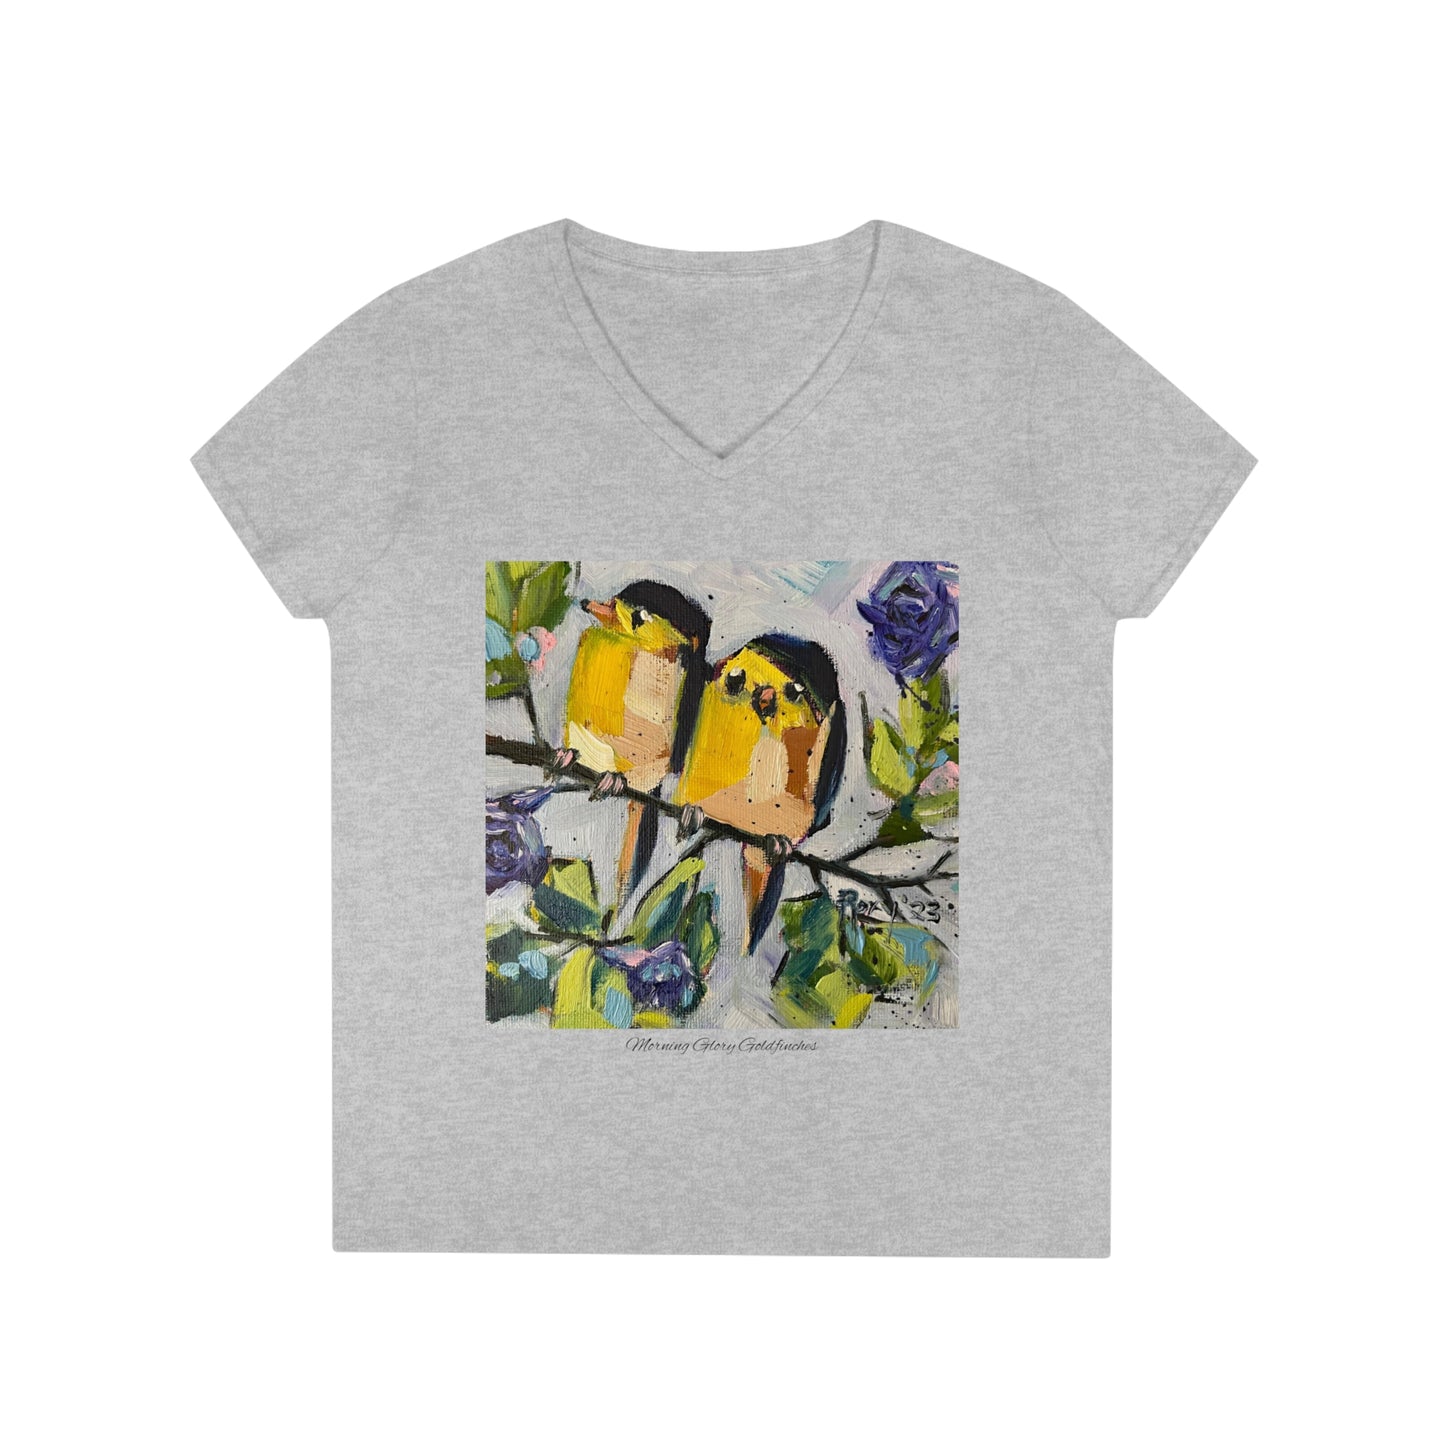 Morning Glory Goldfinches Ladies' V-Neck T-Shirt